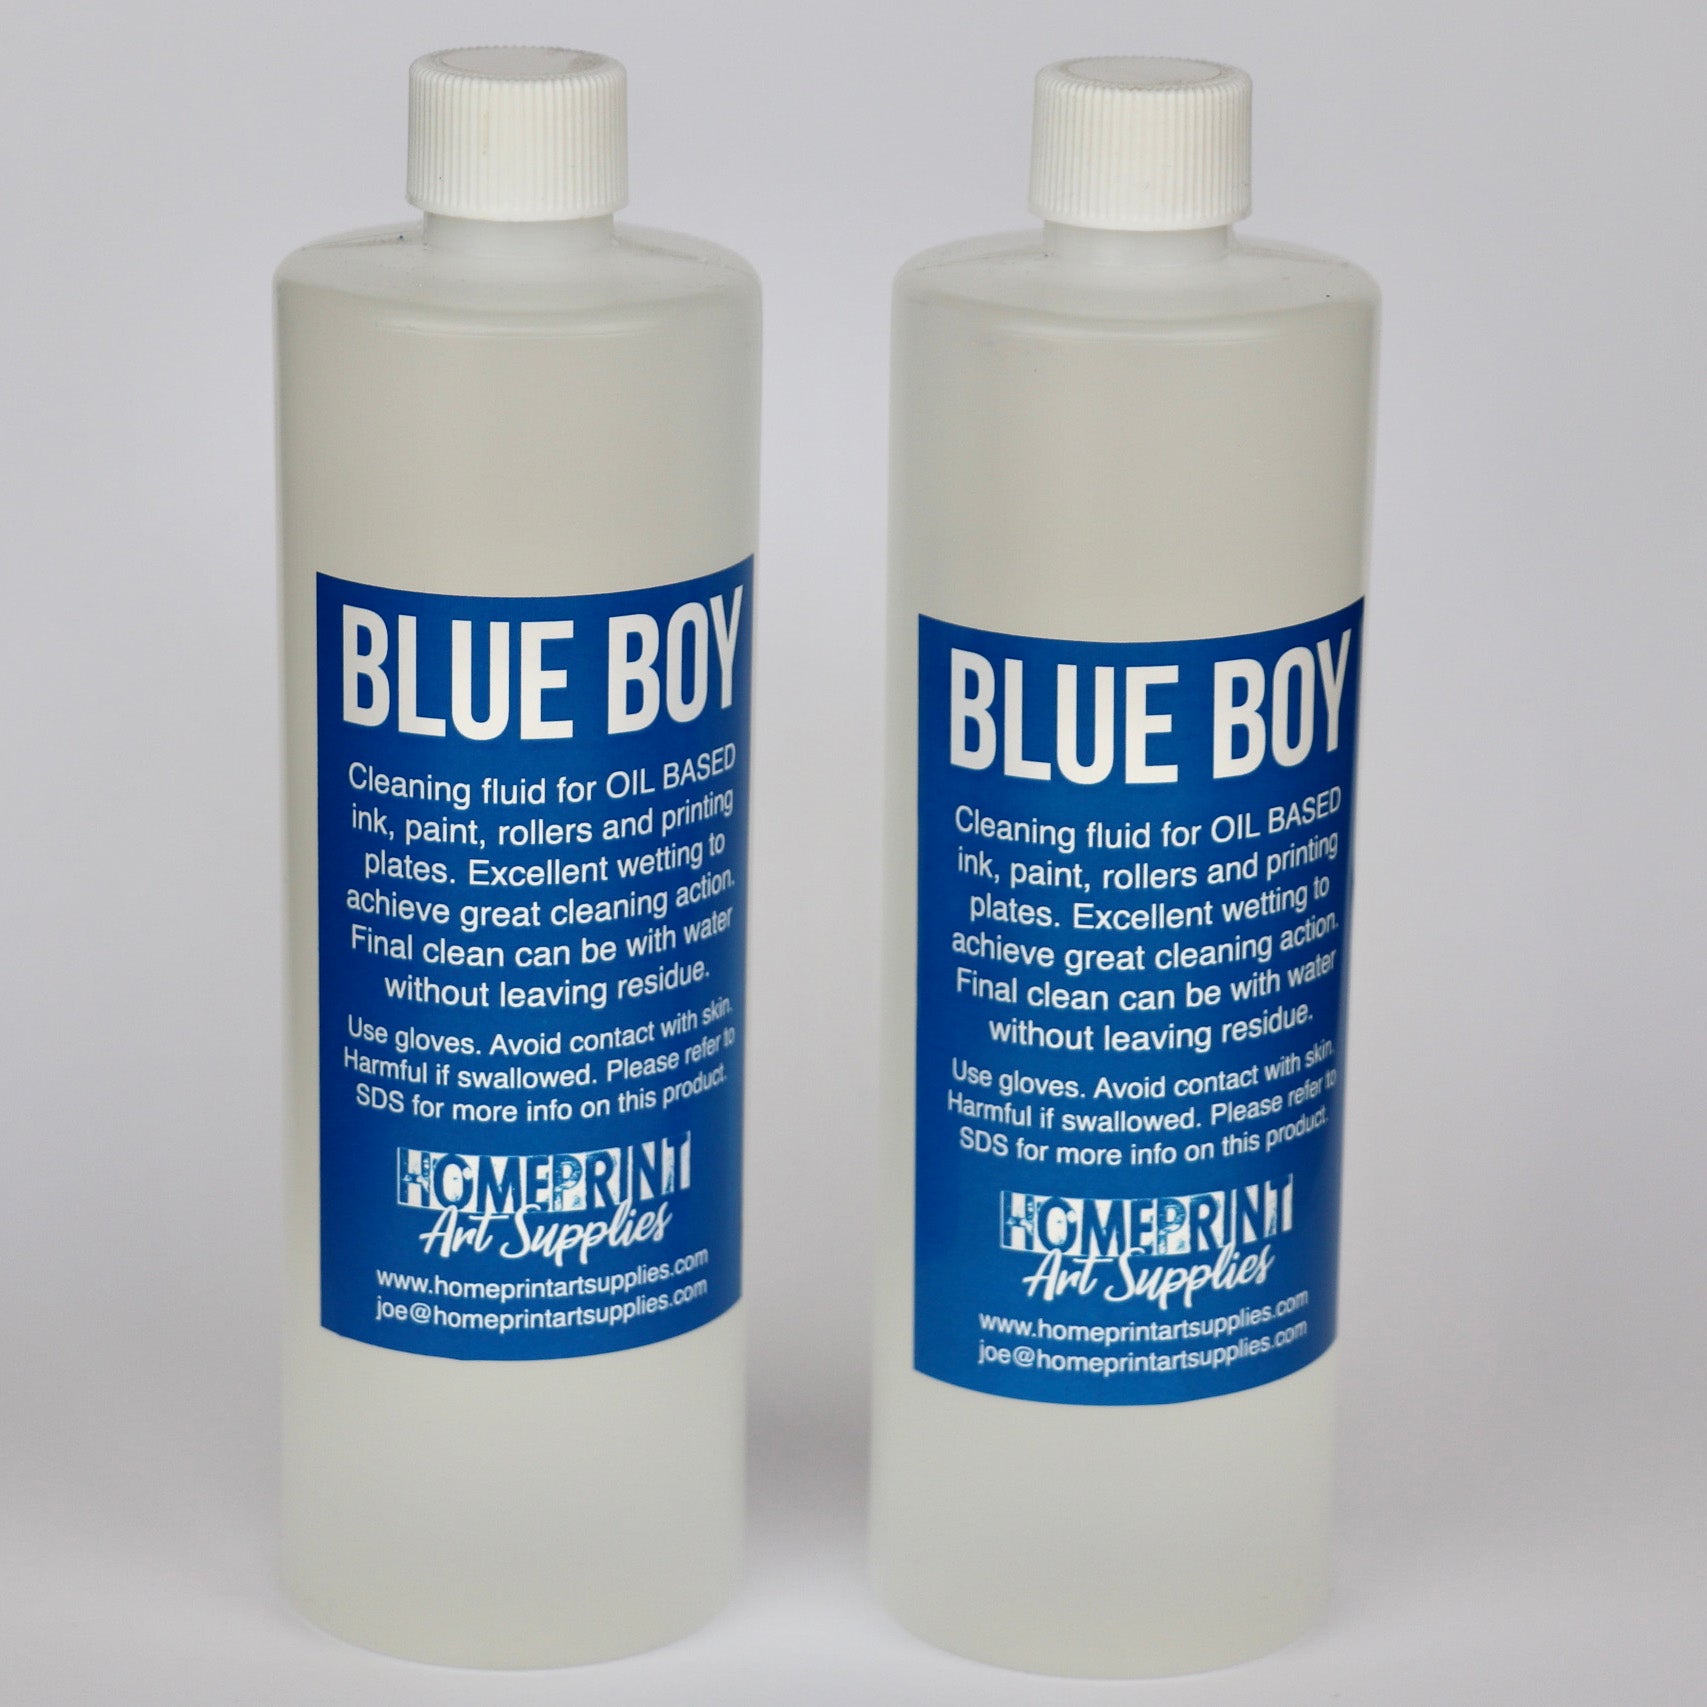 Blue Boy cleaning solution